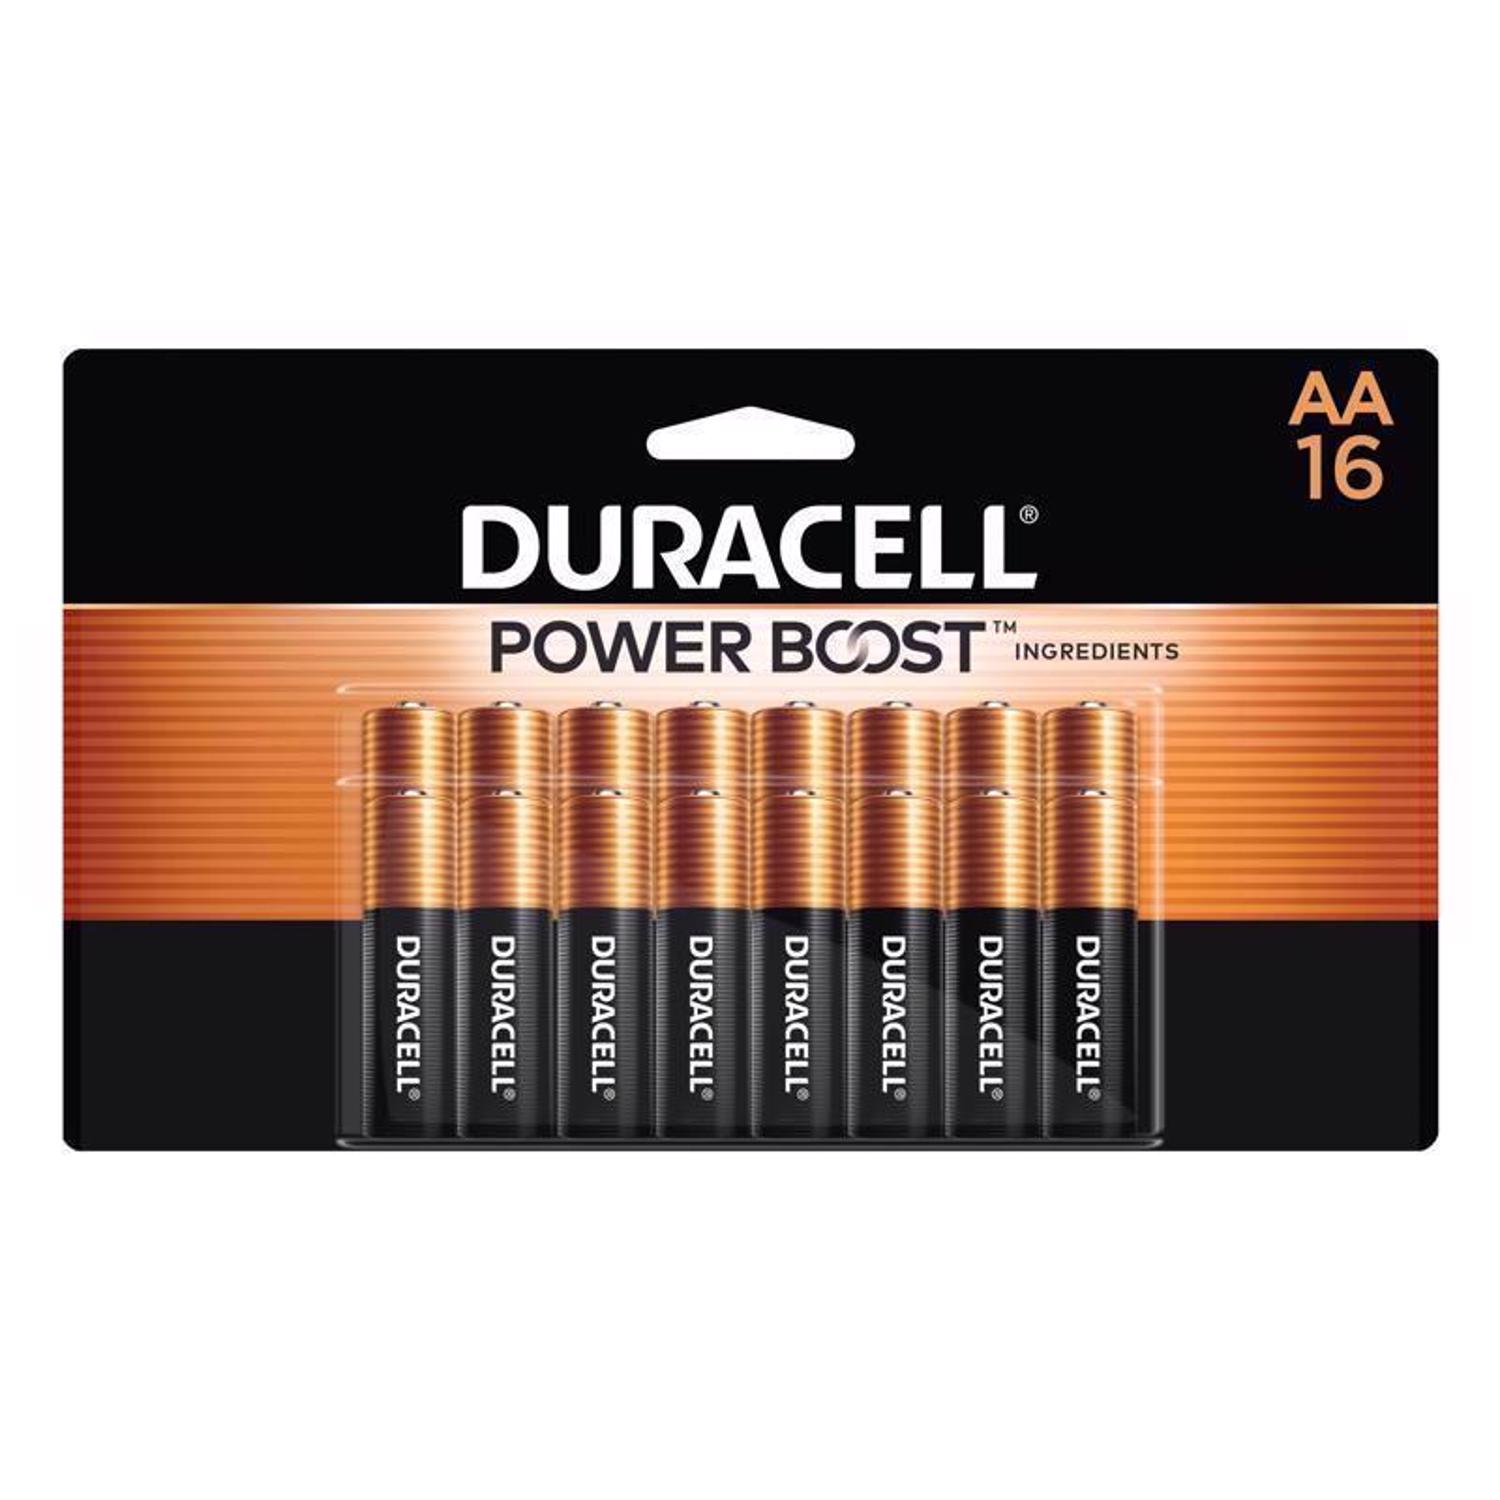 Photos - Household Switch Duracell Coppertop AA Alkaline Batteries 16 pk Carded 92948 